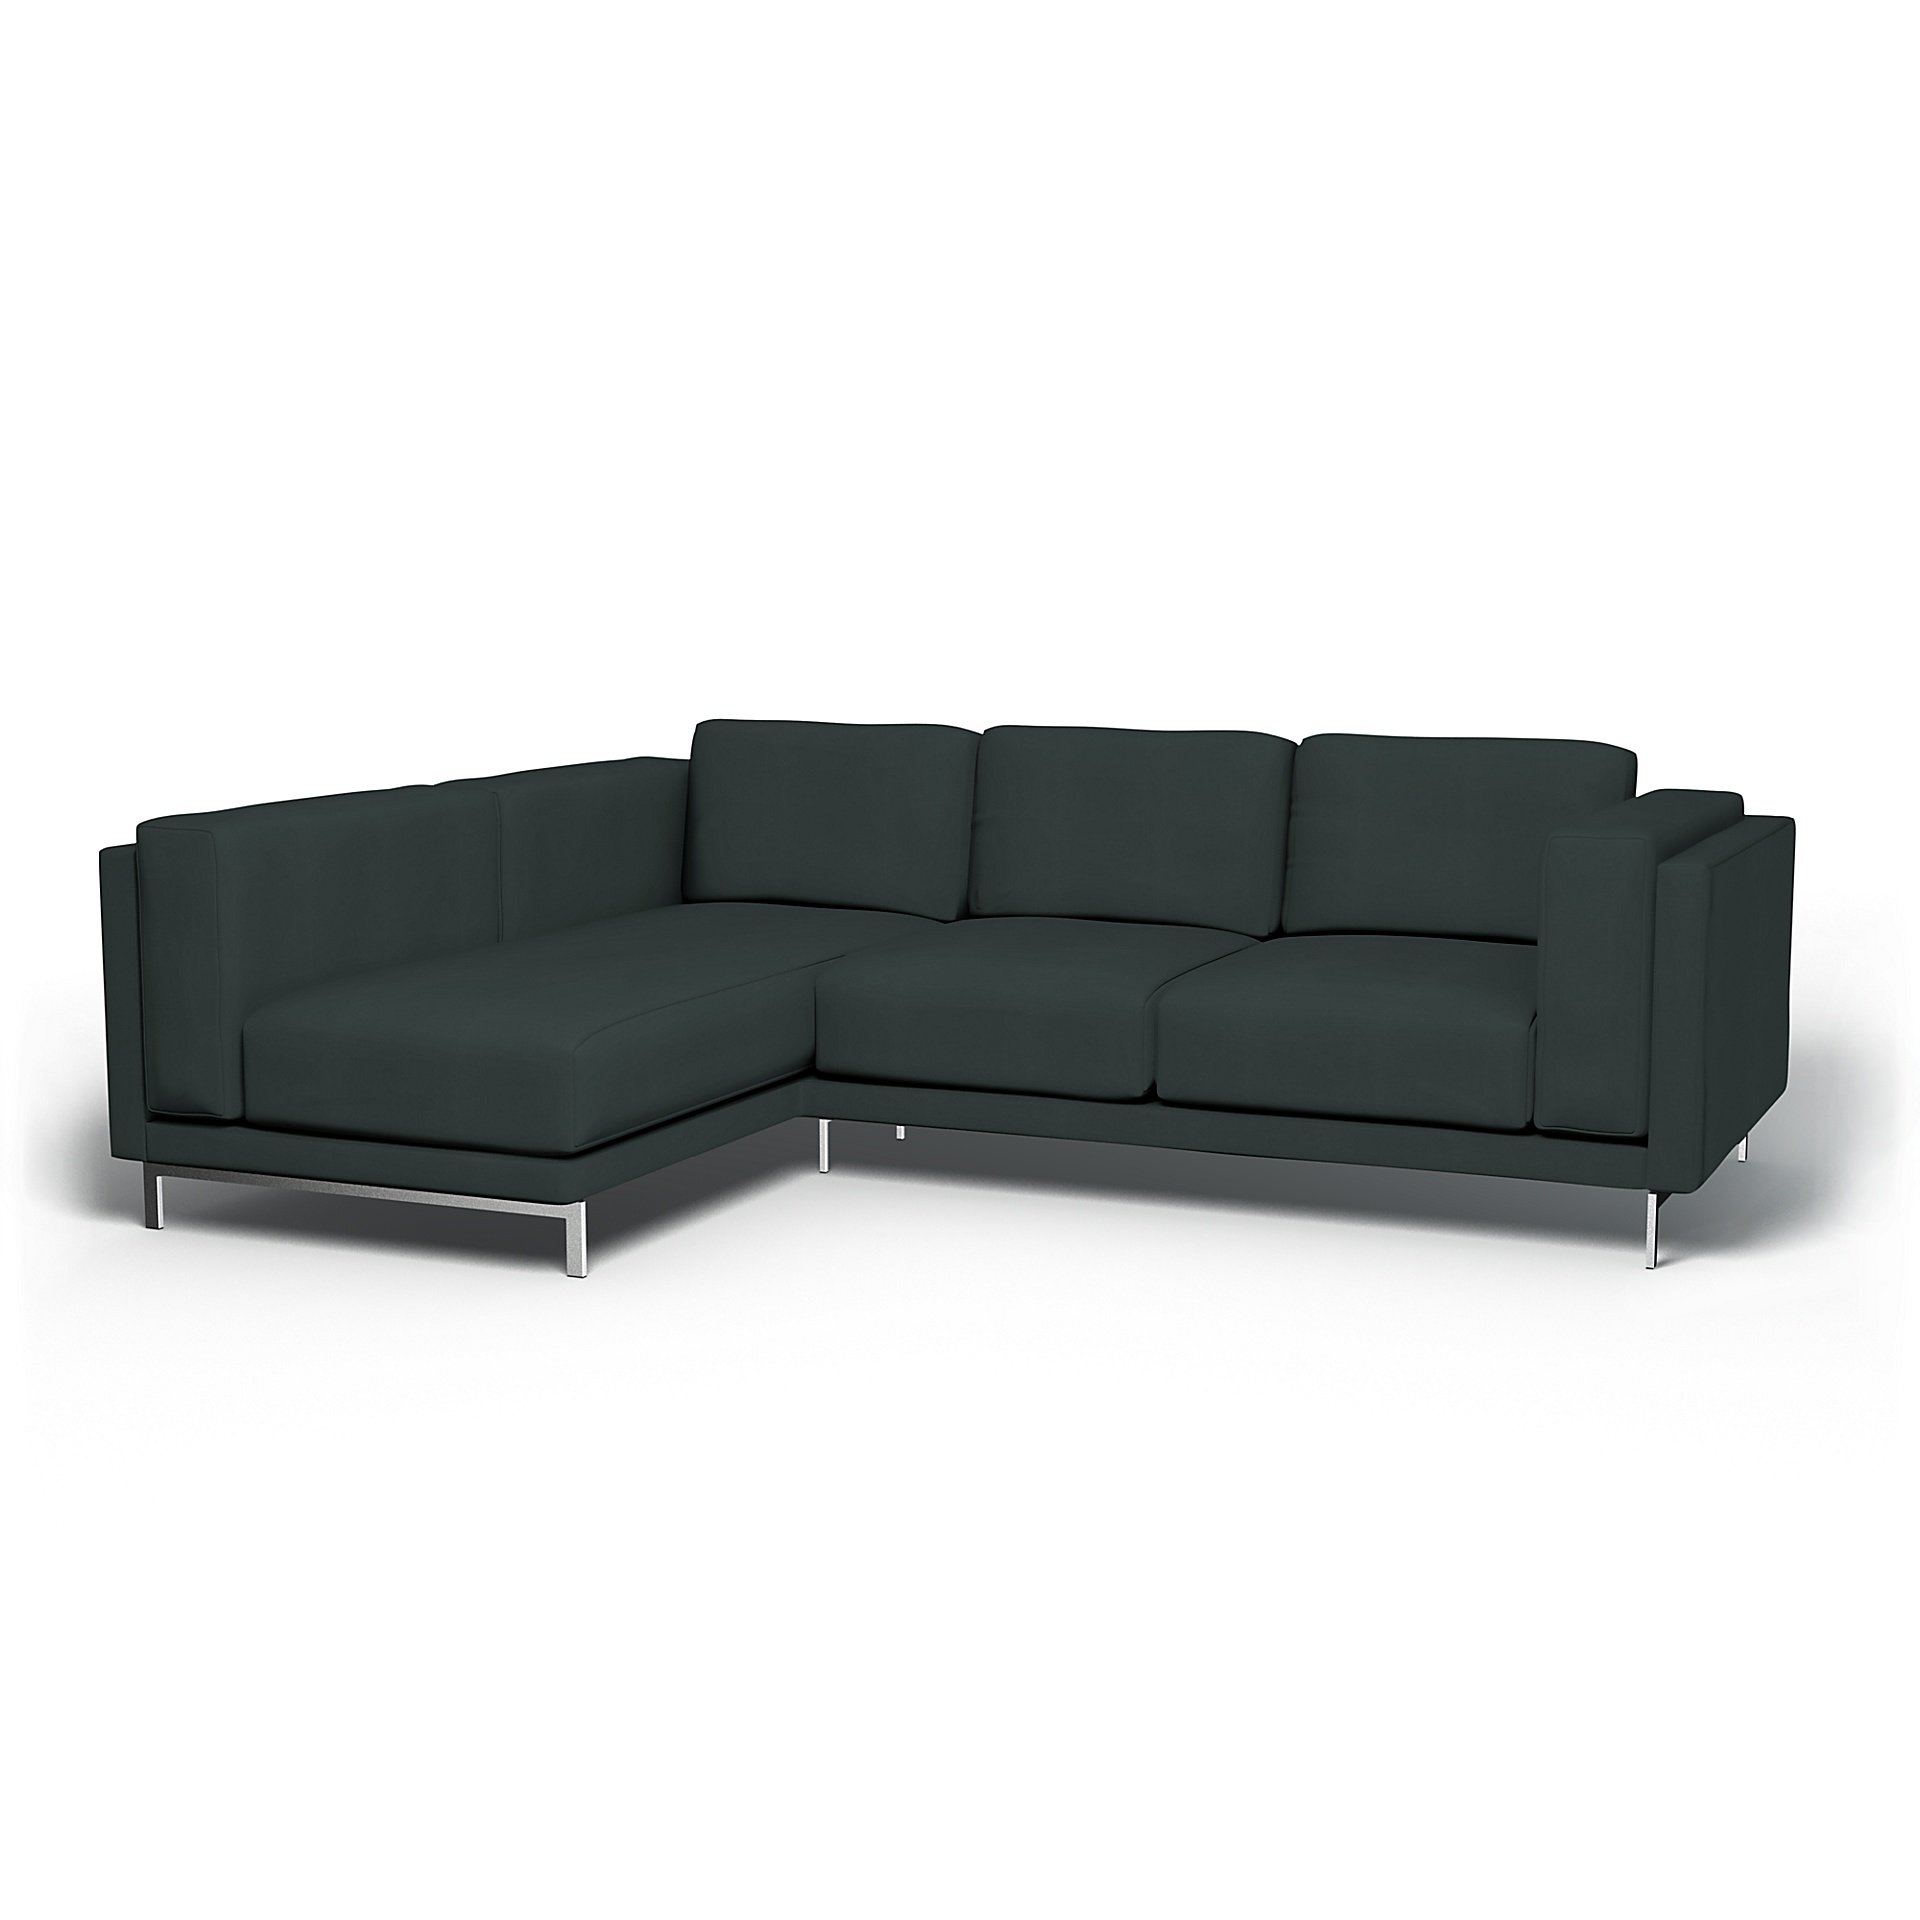 IKEA - Nockeby 3 Seater Sofa with Left Chaise Cover, Graphite Grey, Cotton - Bemz